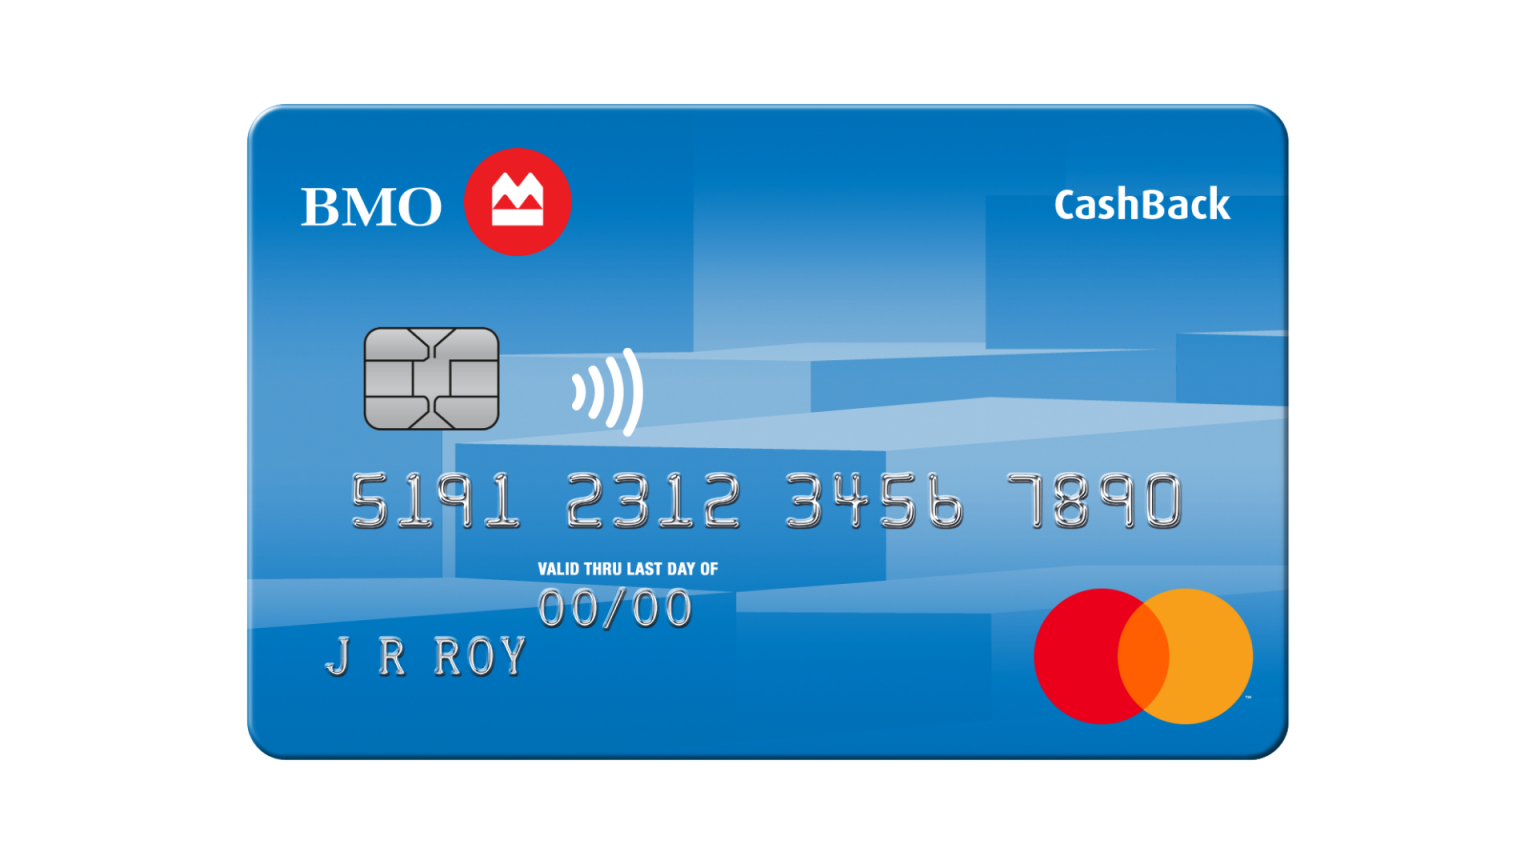 bmo-cashback-mastercard-credit-card-full-review-should-you-get-it